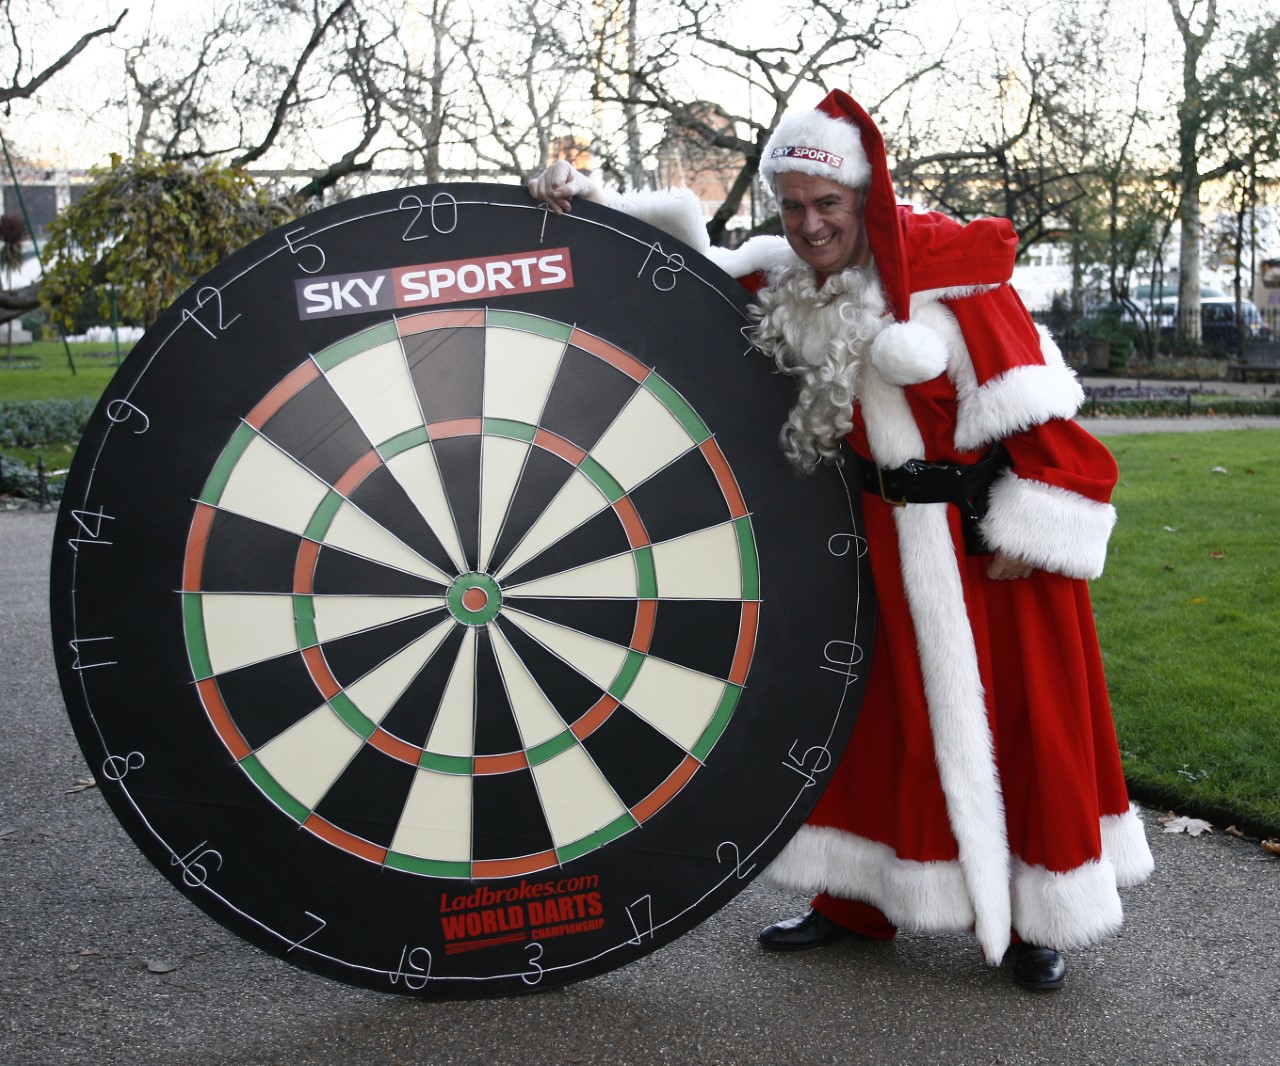 Waddell dressed as Santa before the World Darts Championship